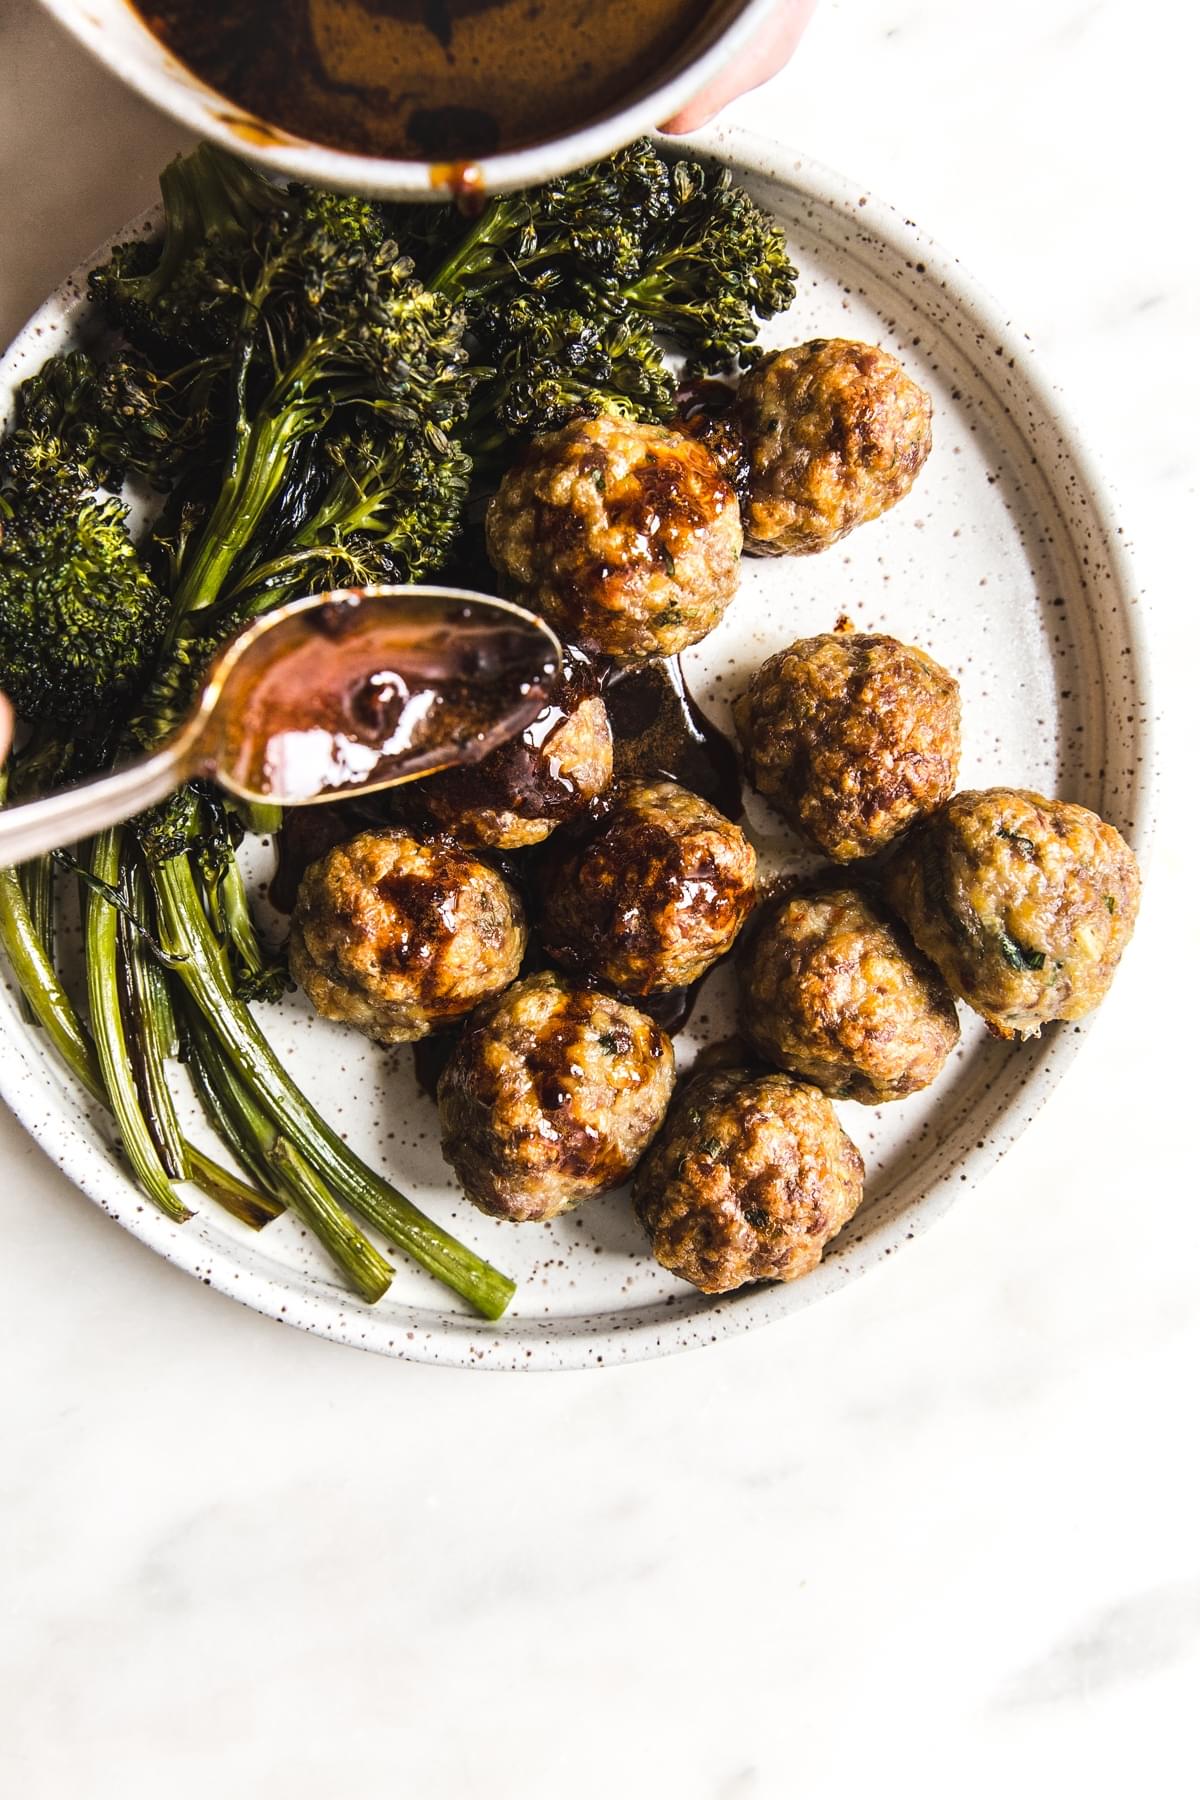 spoon drizzling homemade teriyaki sauce over baked meatballs on a plate with roasted broccoli